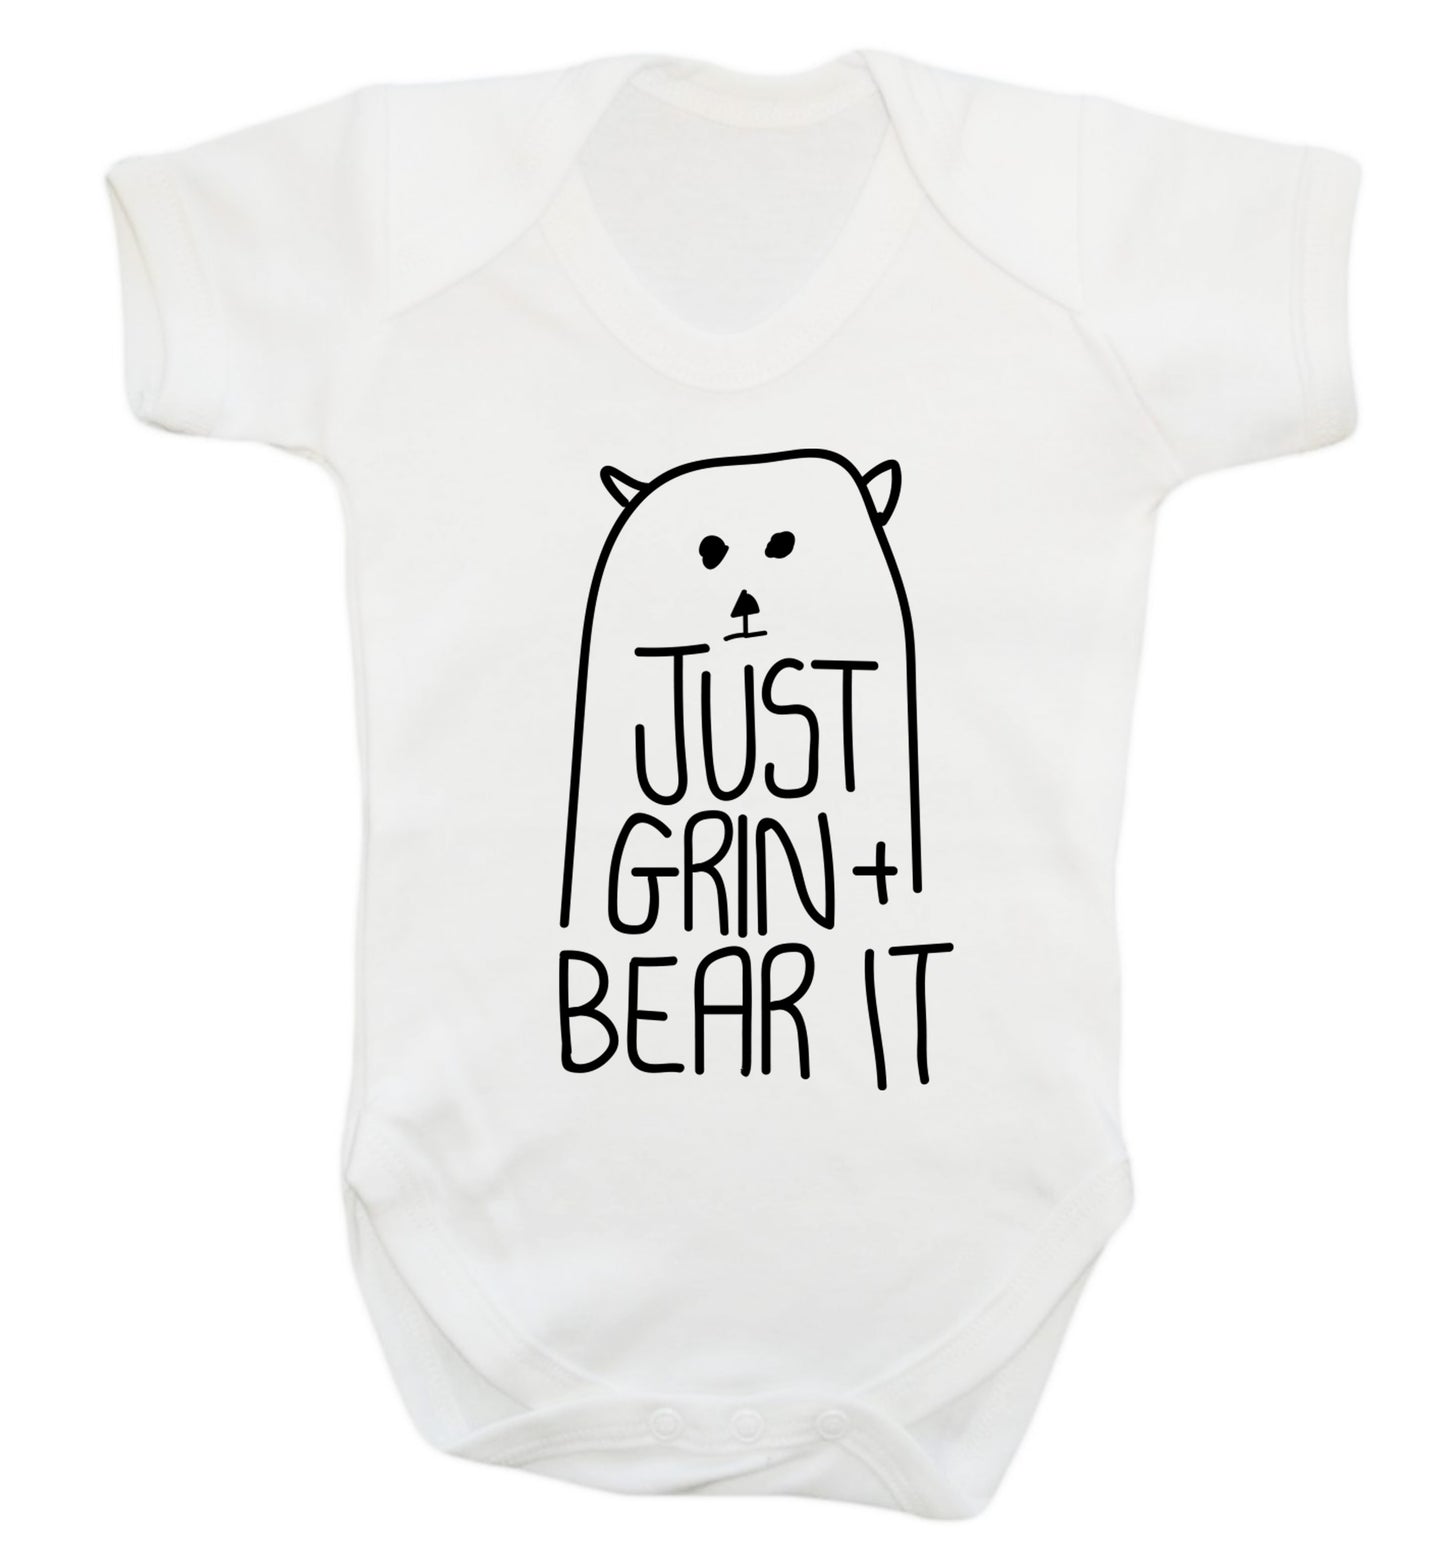 Just grin and bear it Baby Vest white 18-24 months